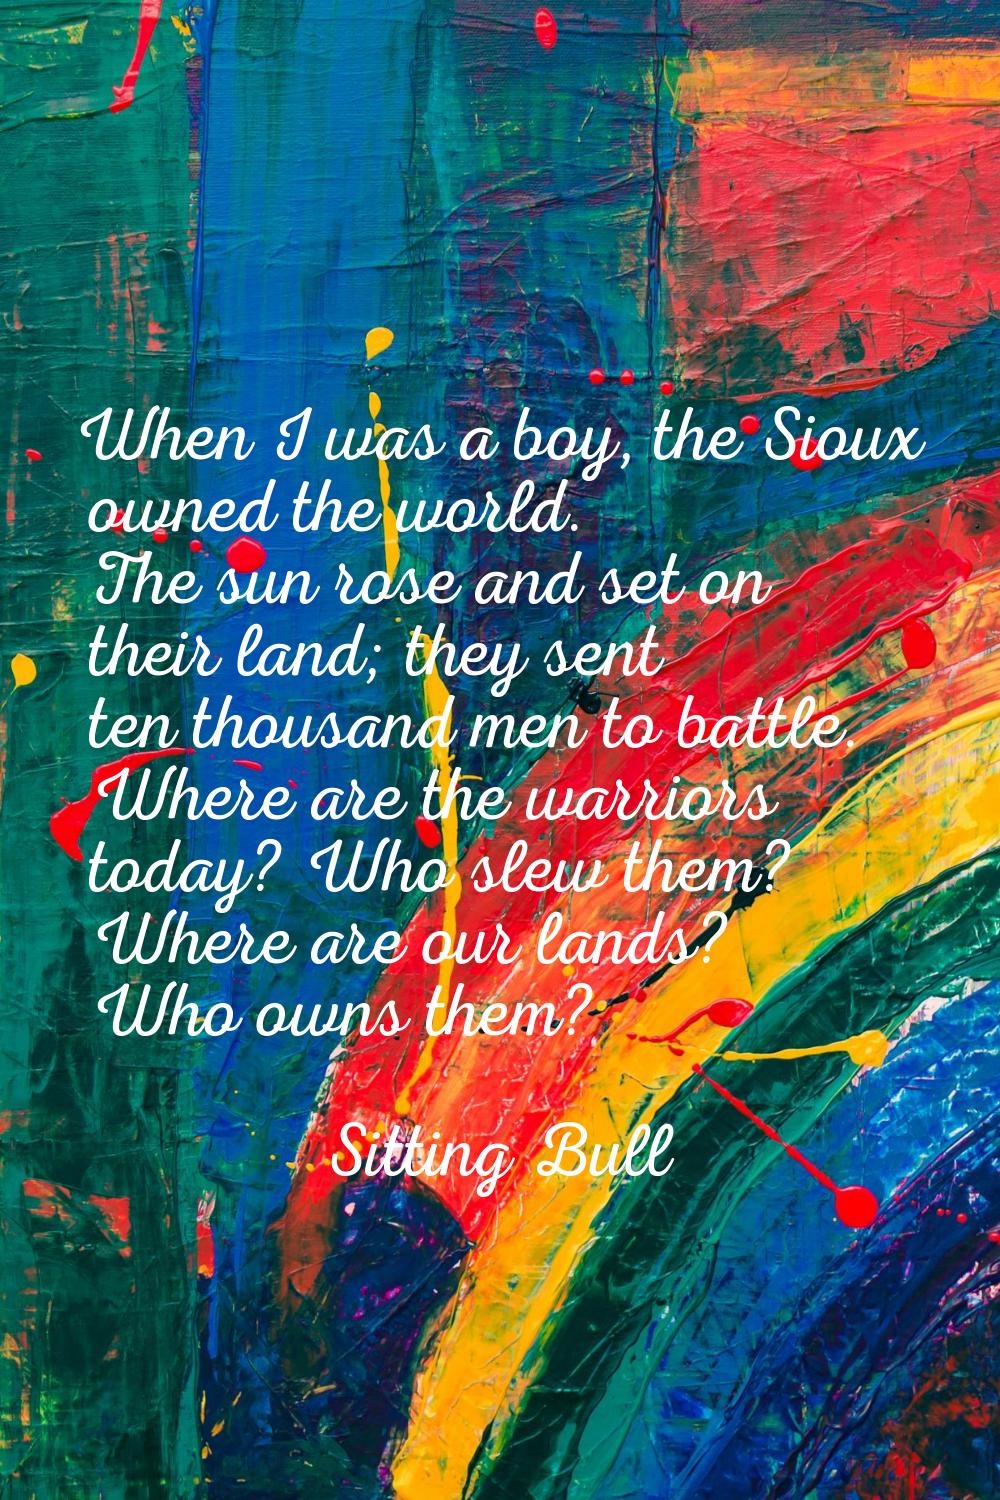 When I was a boy, the Sioux owned the world. The sun rose and set on their land; they sent ten thou